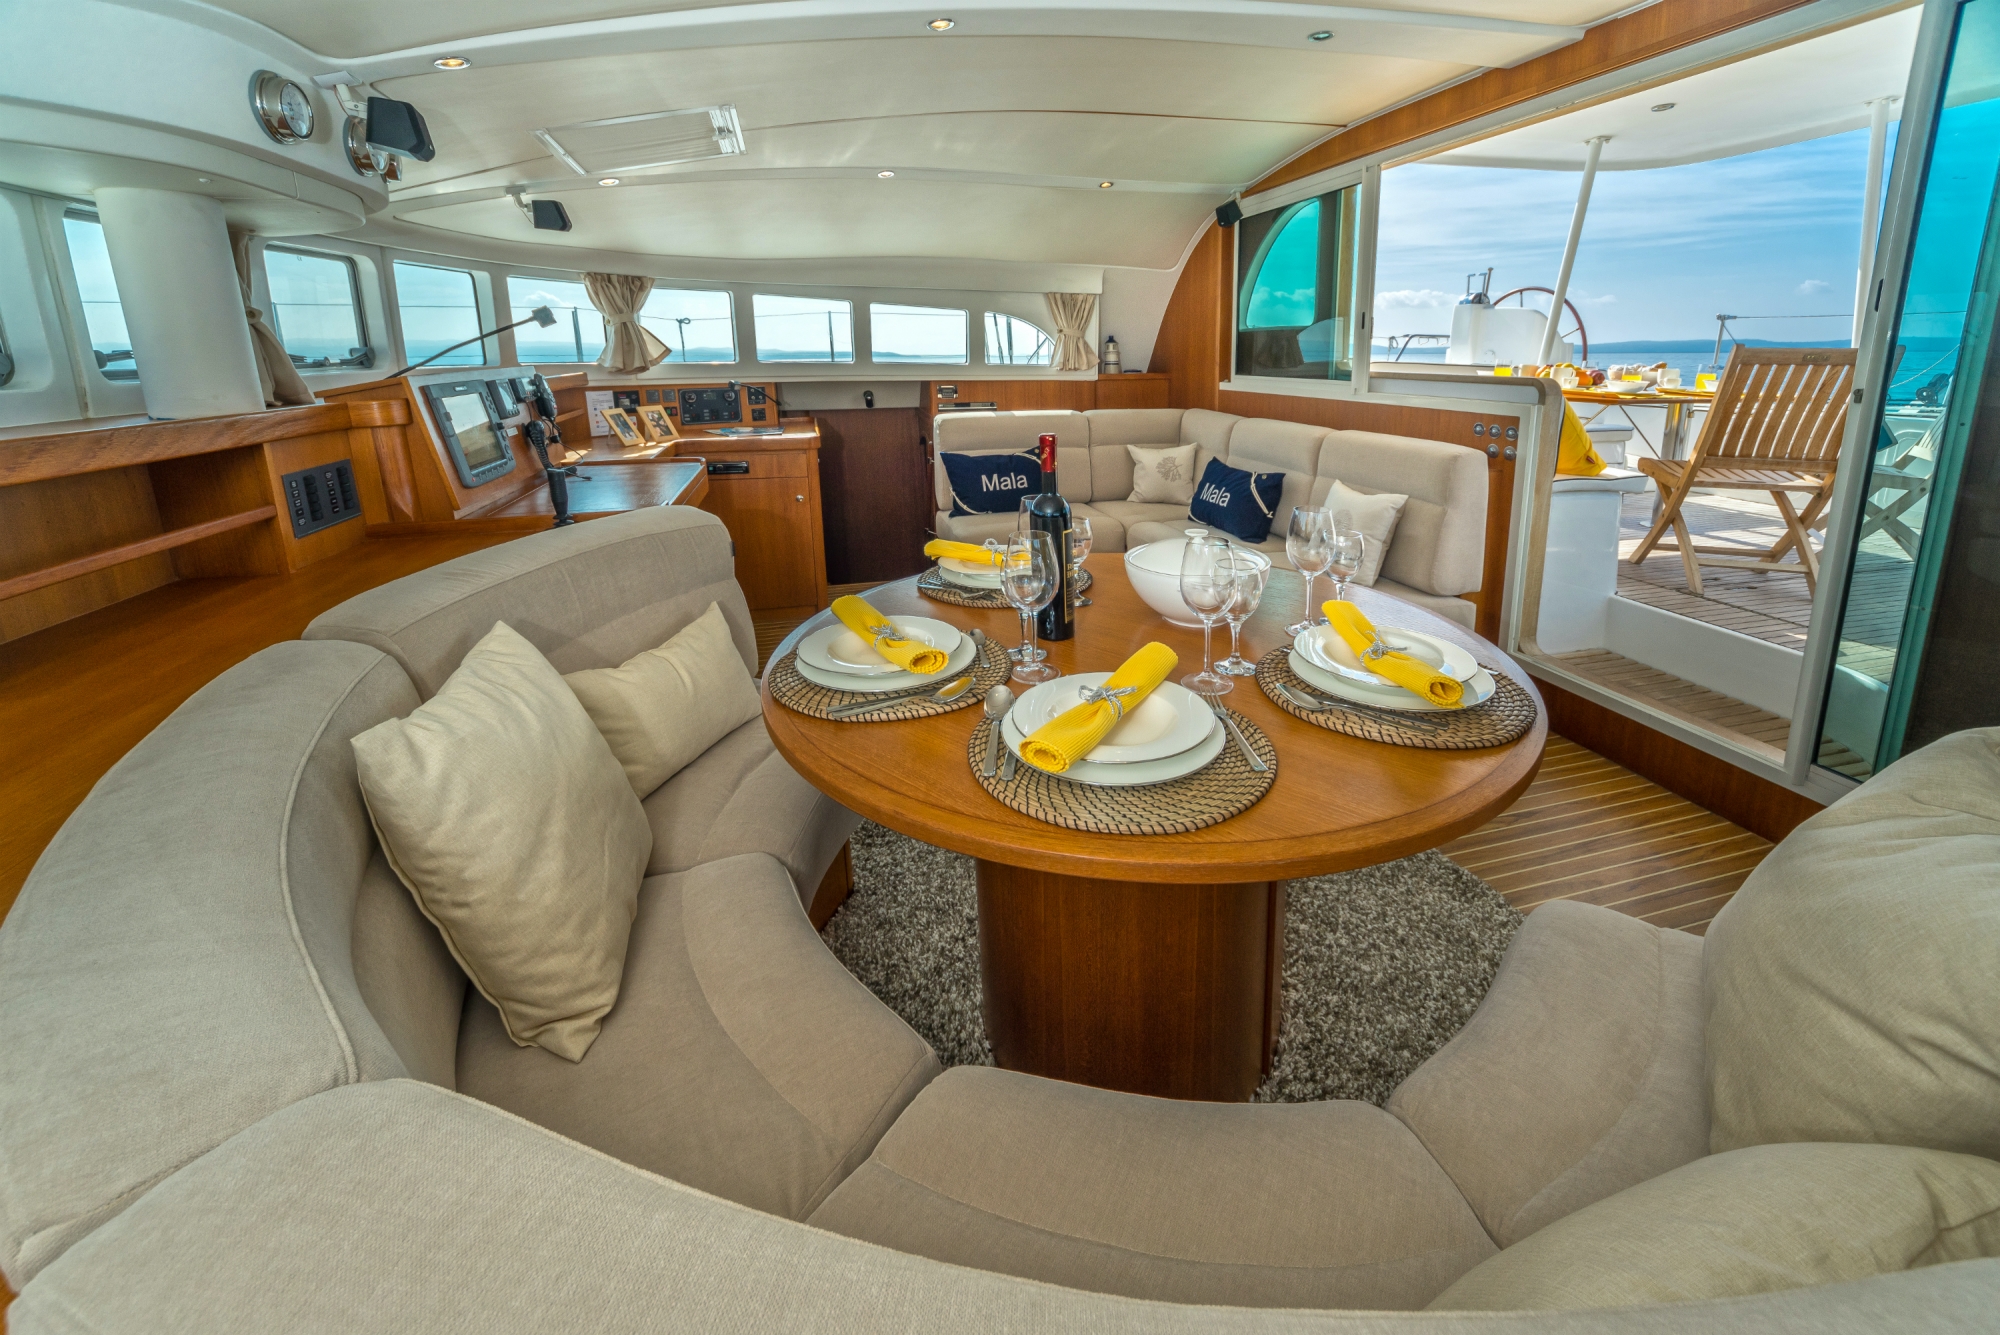 Reupholstery yacht interior cushions by Frey for Lagoon 570 Mala, in Aqualclean beige & co-ordinating personalised pillows.